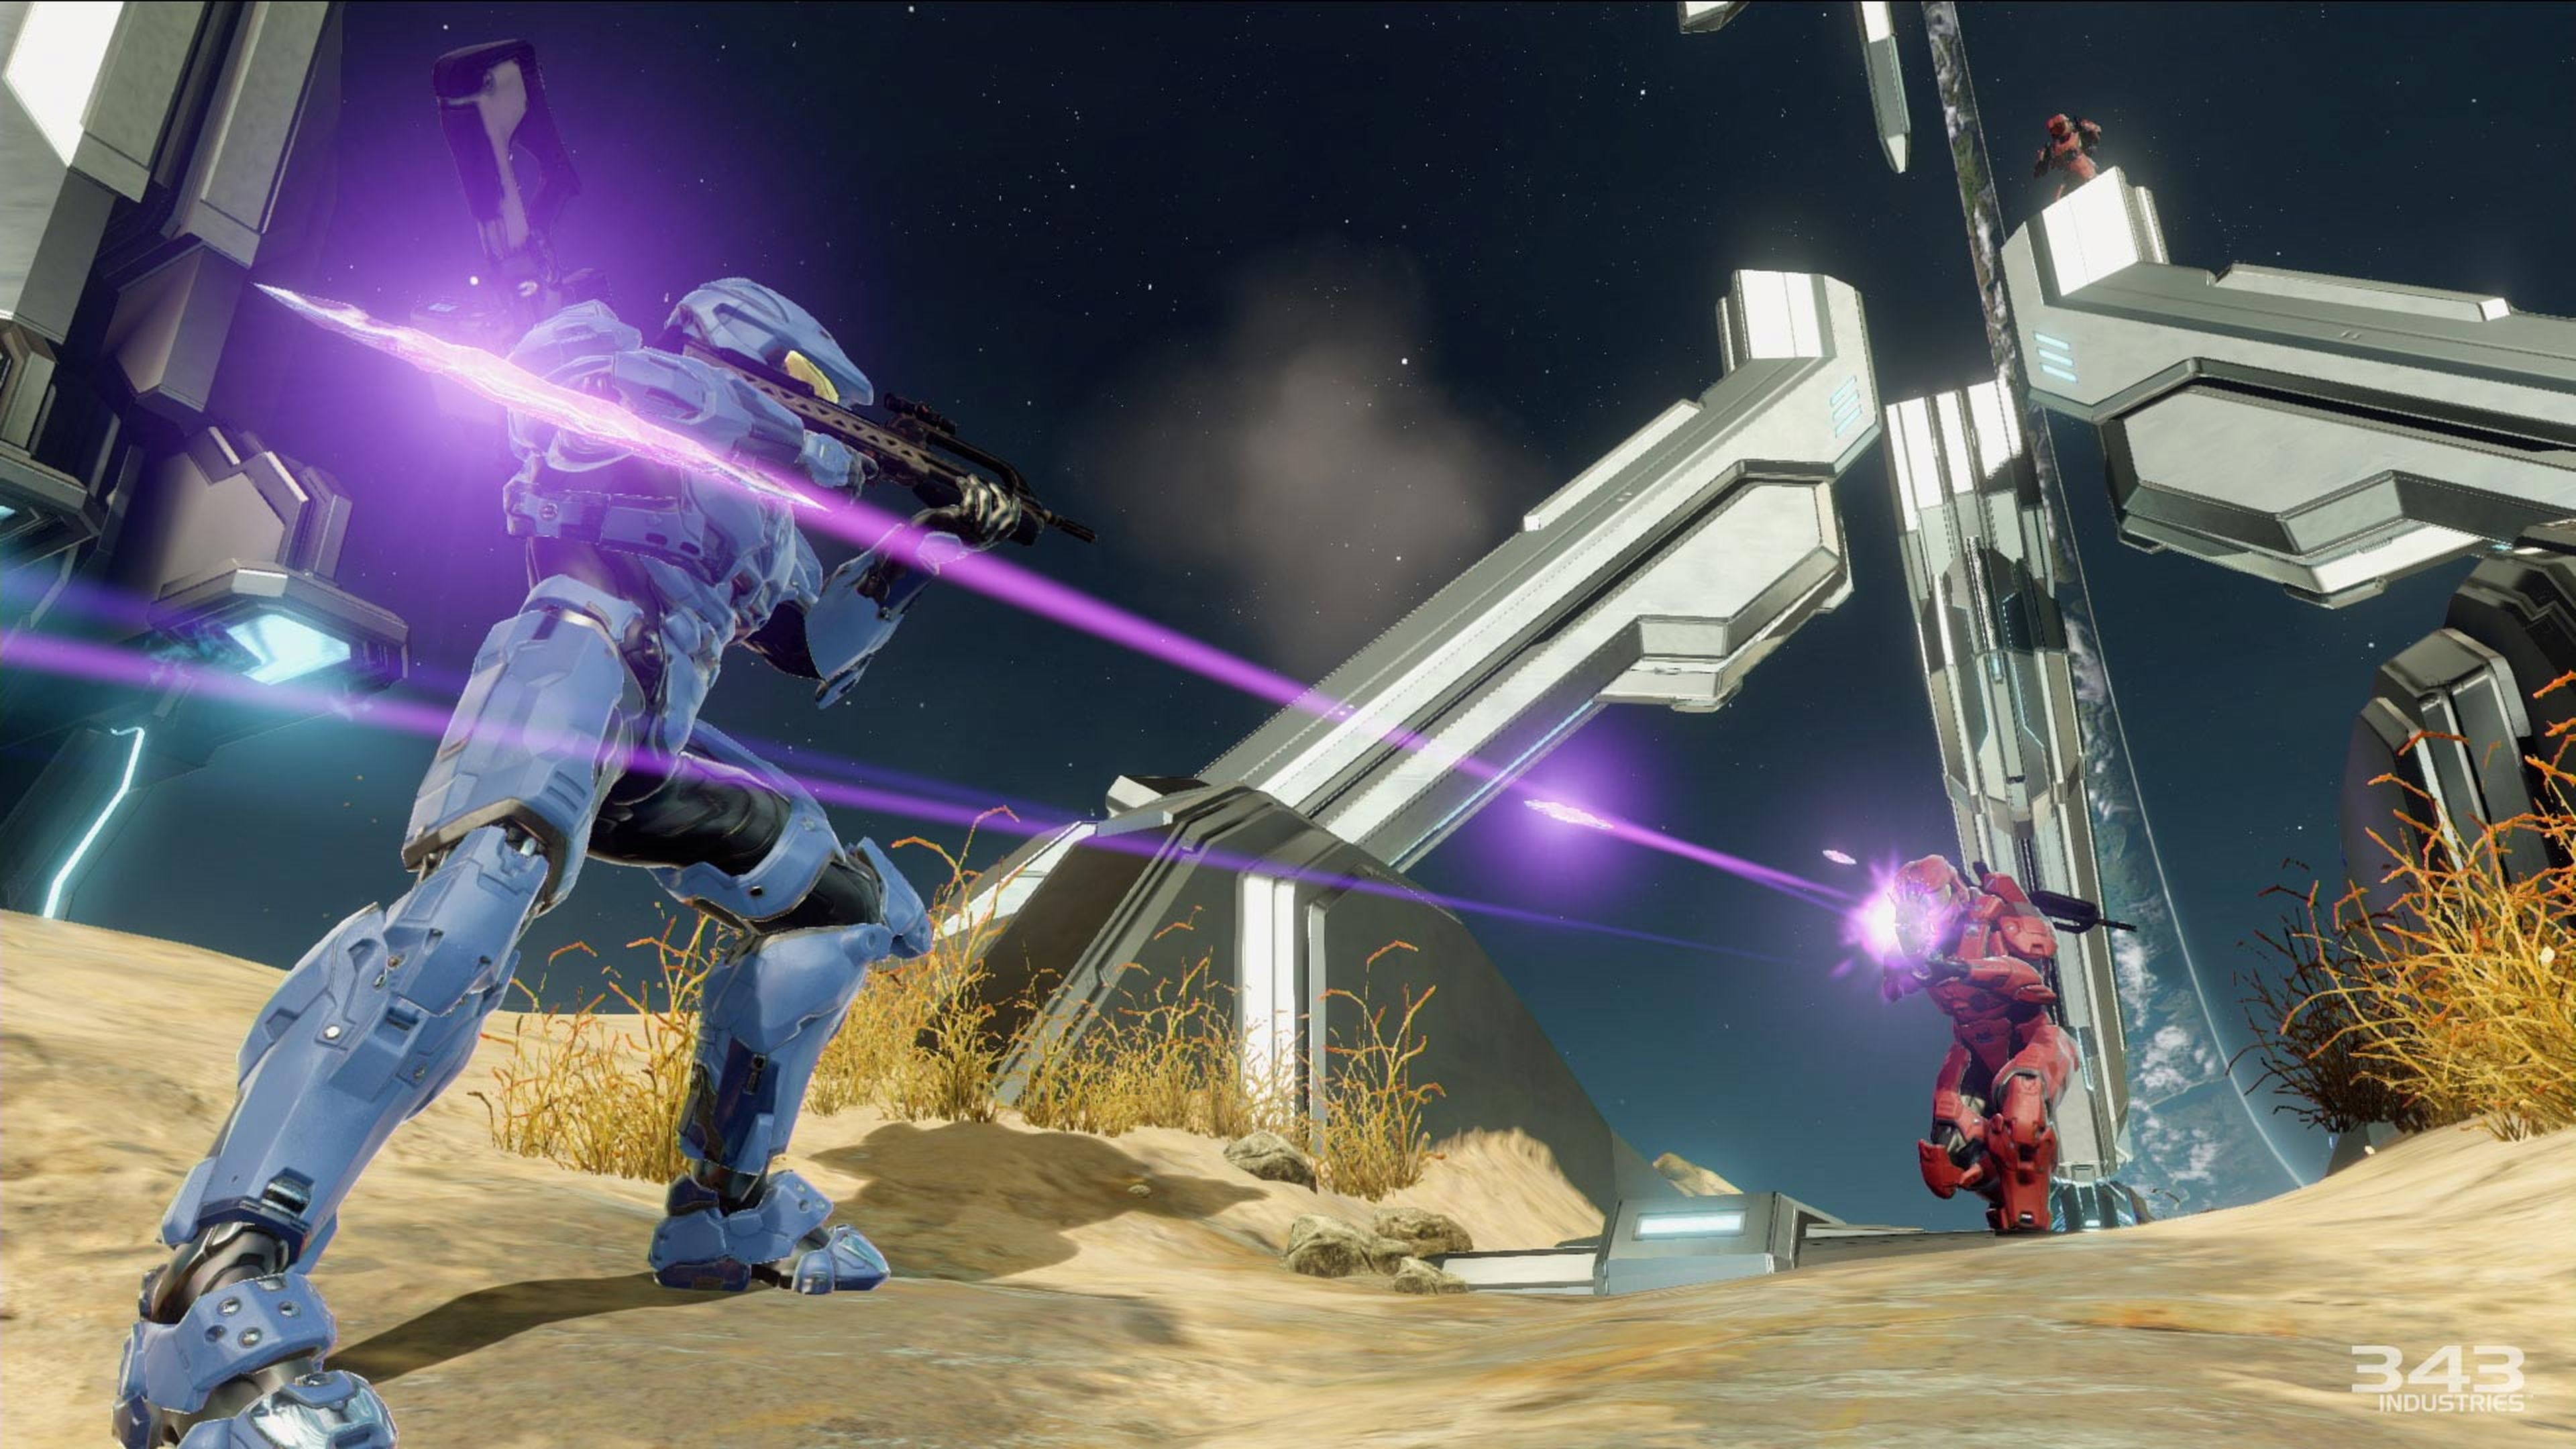 Avance de Halo: The Master Chief Collection